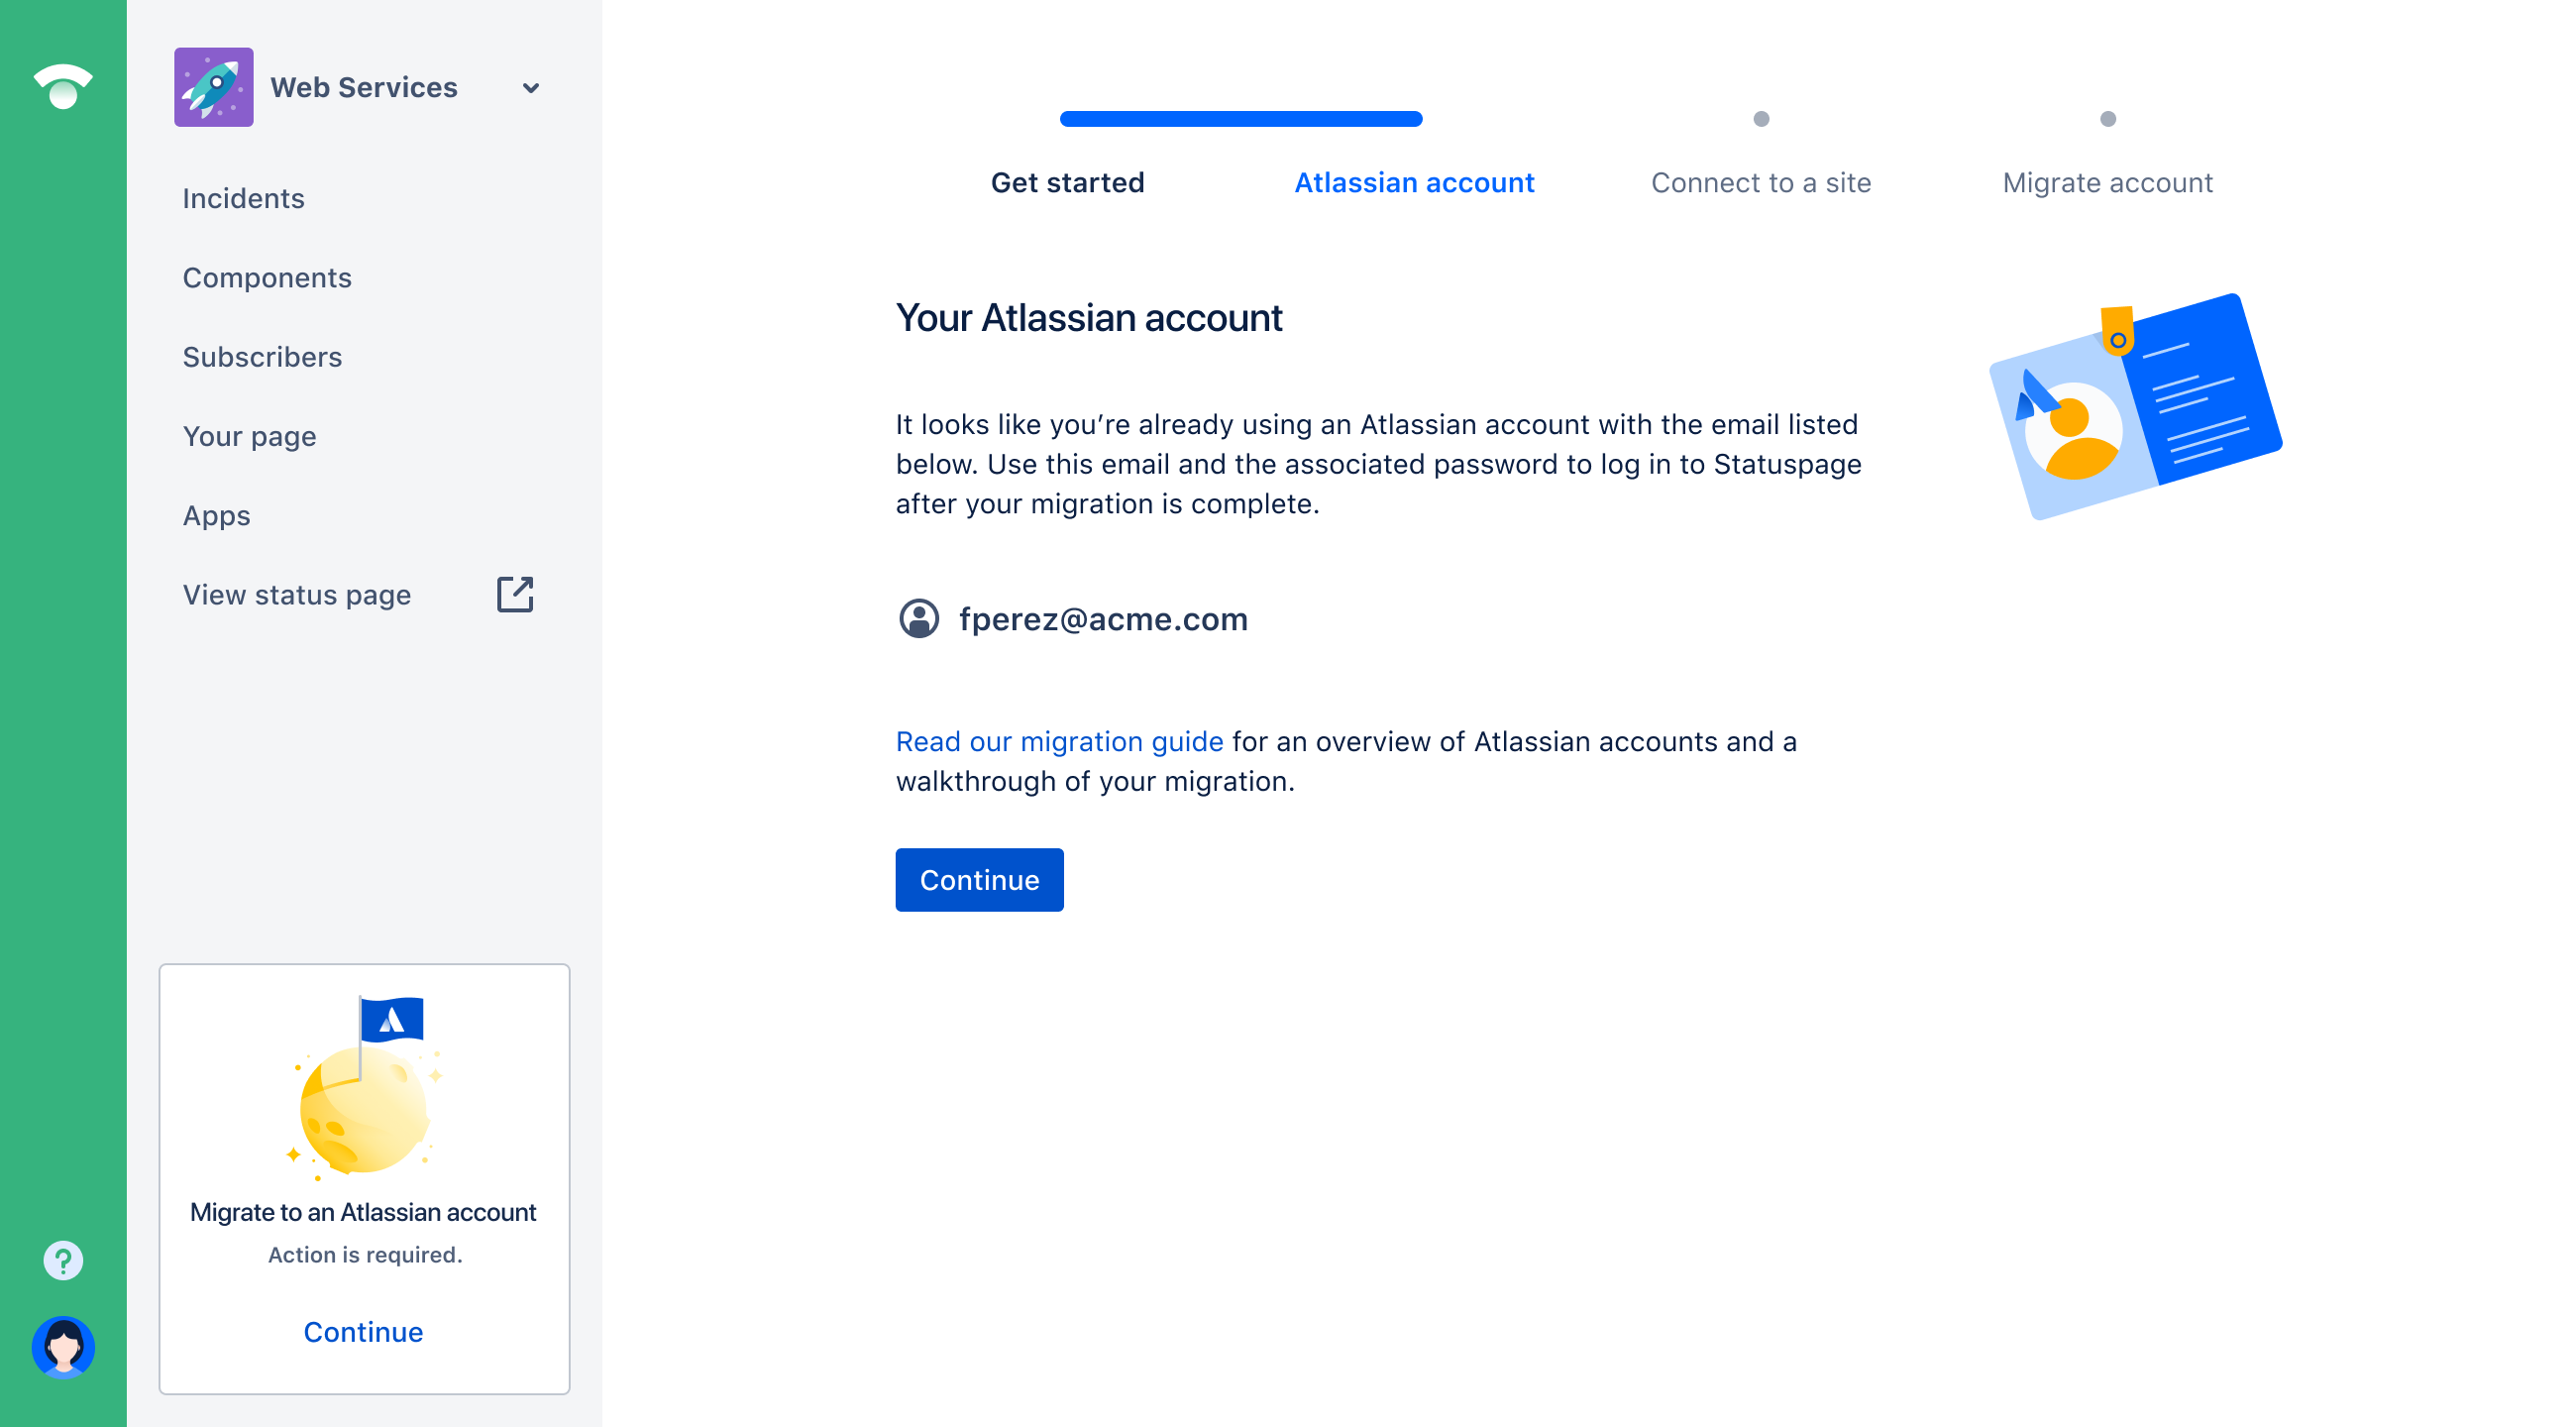 Shows the migration step where you view your Atlassian account email